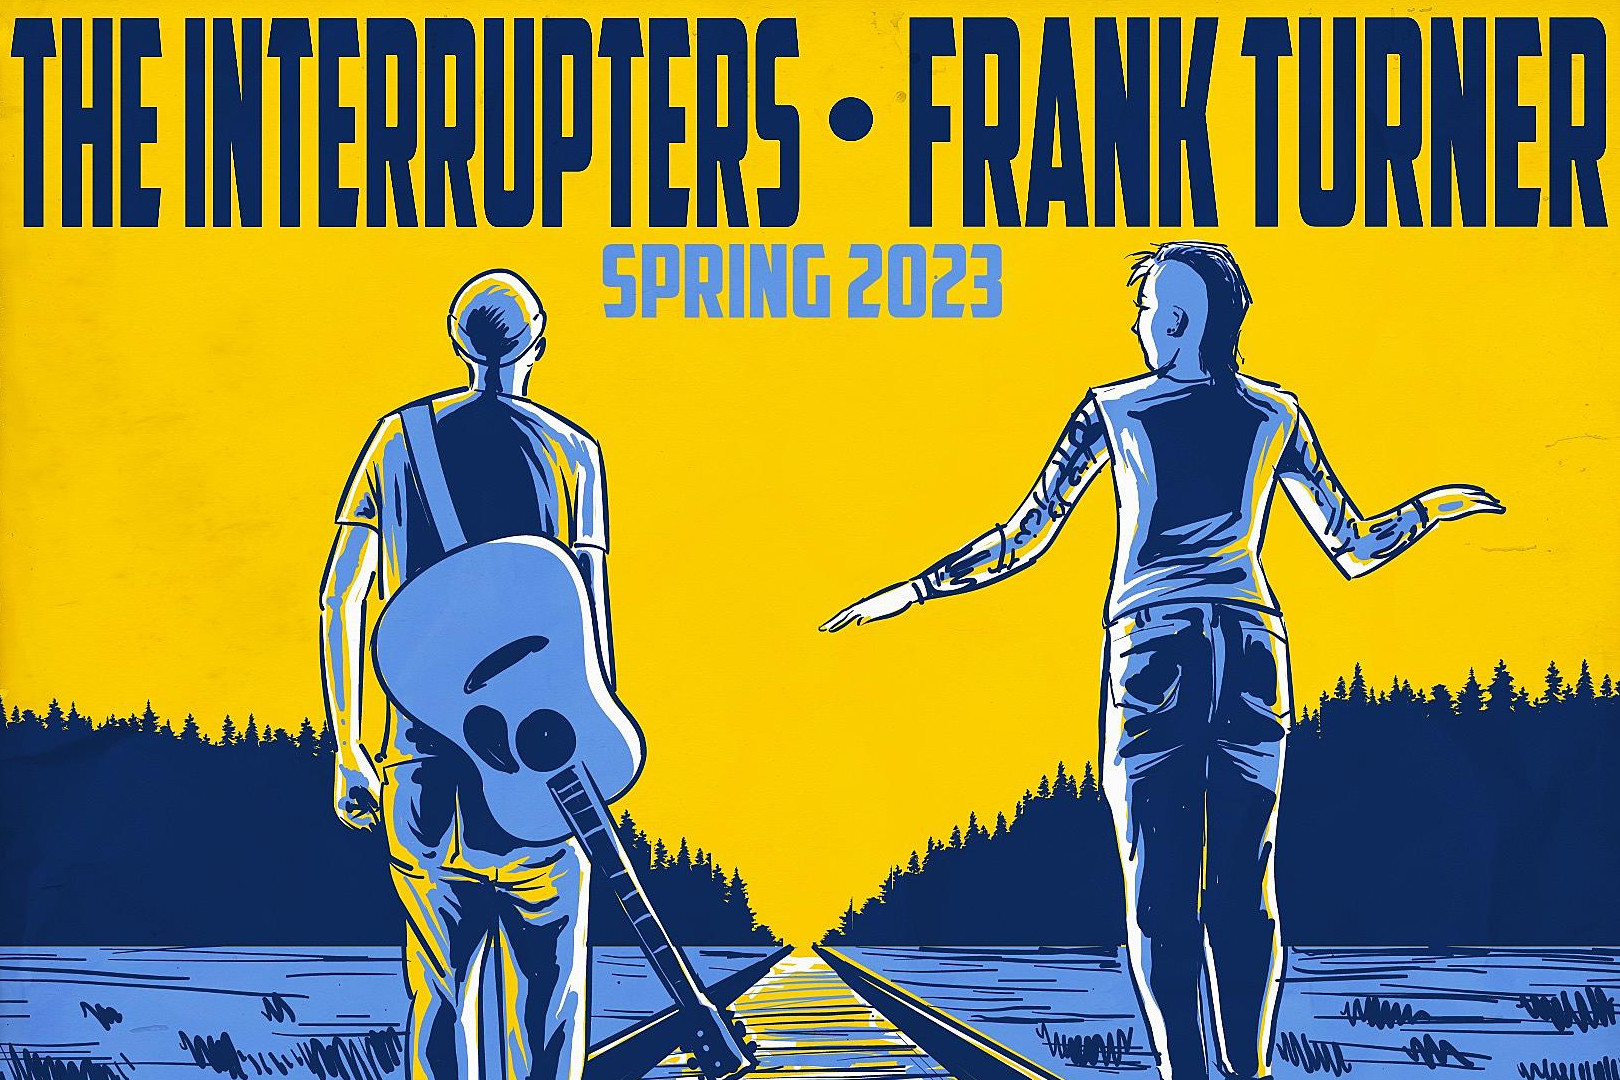 Interrupters and Frank Turner to tour, Hepcat, Chuck Ragan, LJG open select dates